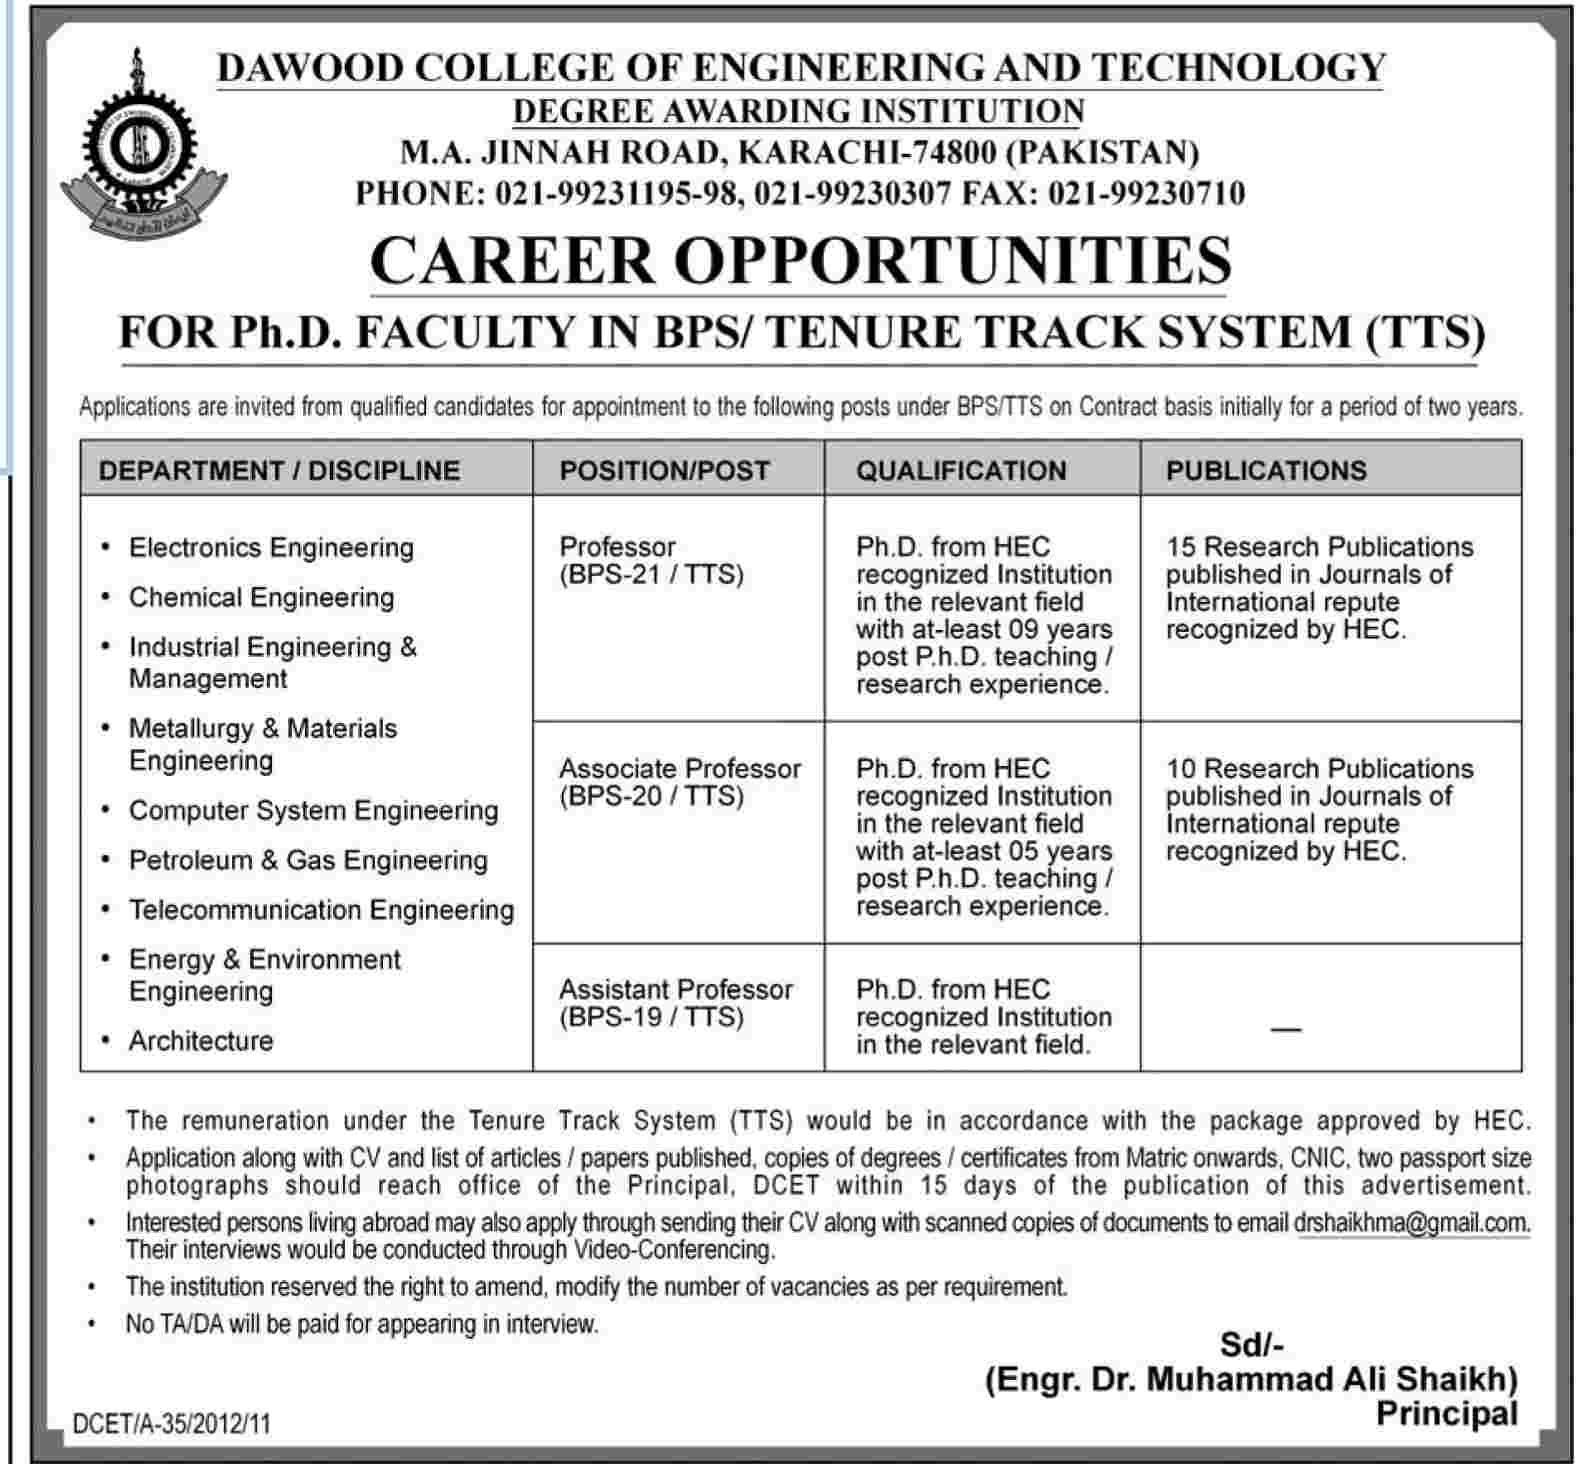 Dawood College of Engineering and Technology, Karachi Jobs Opportunity